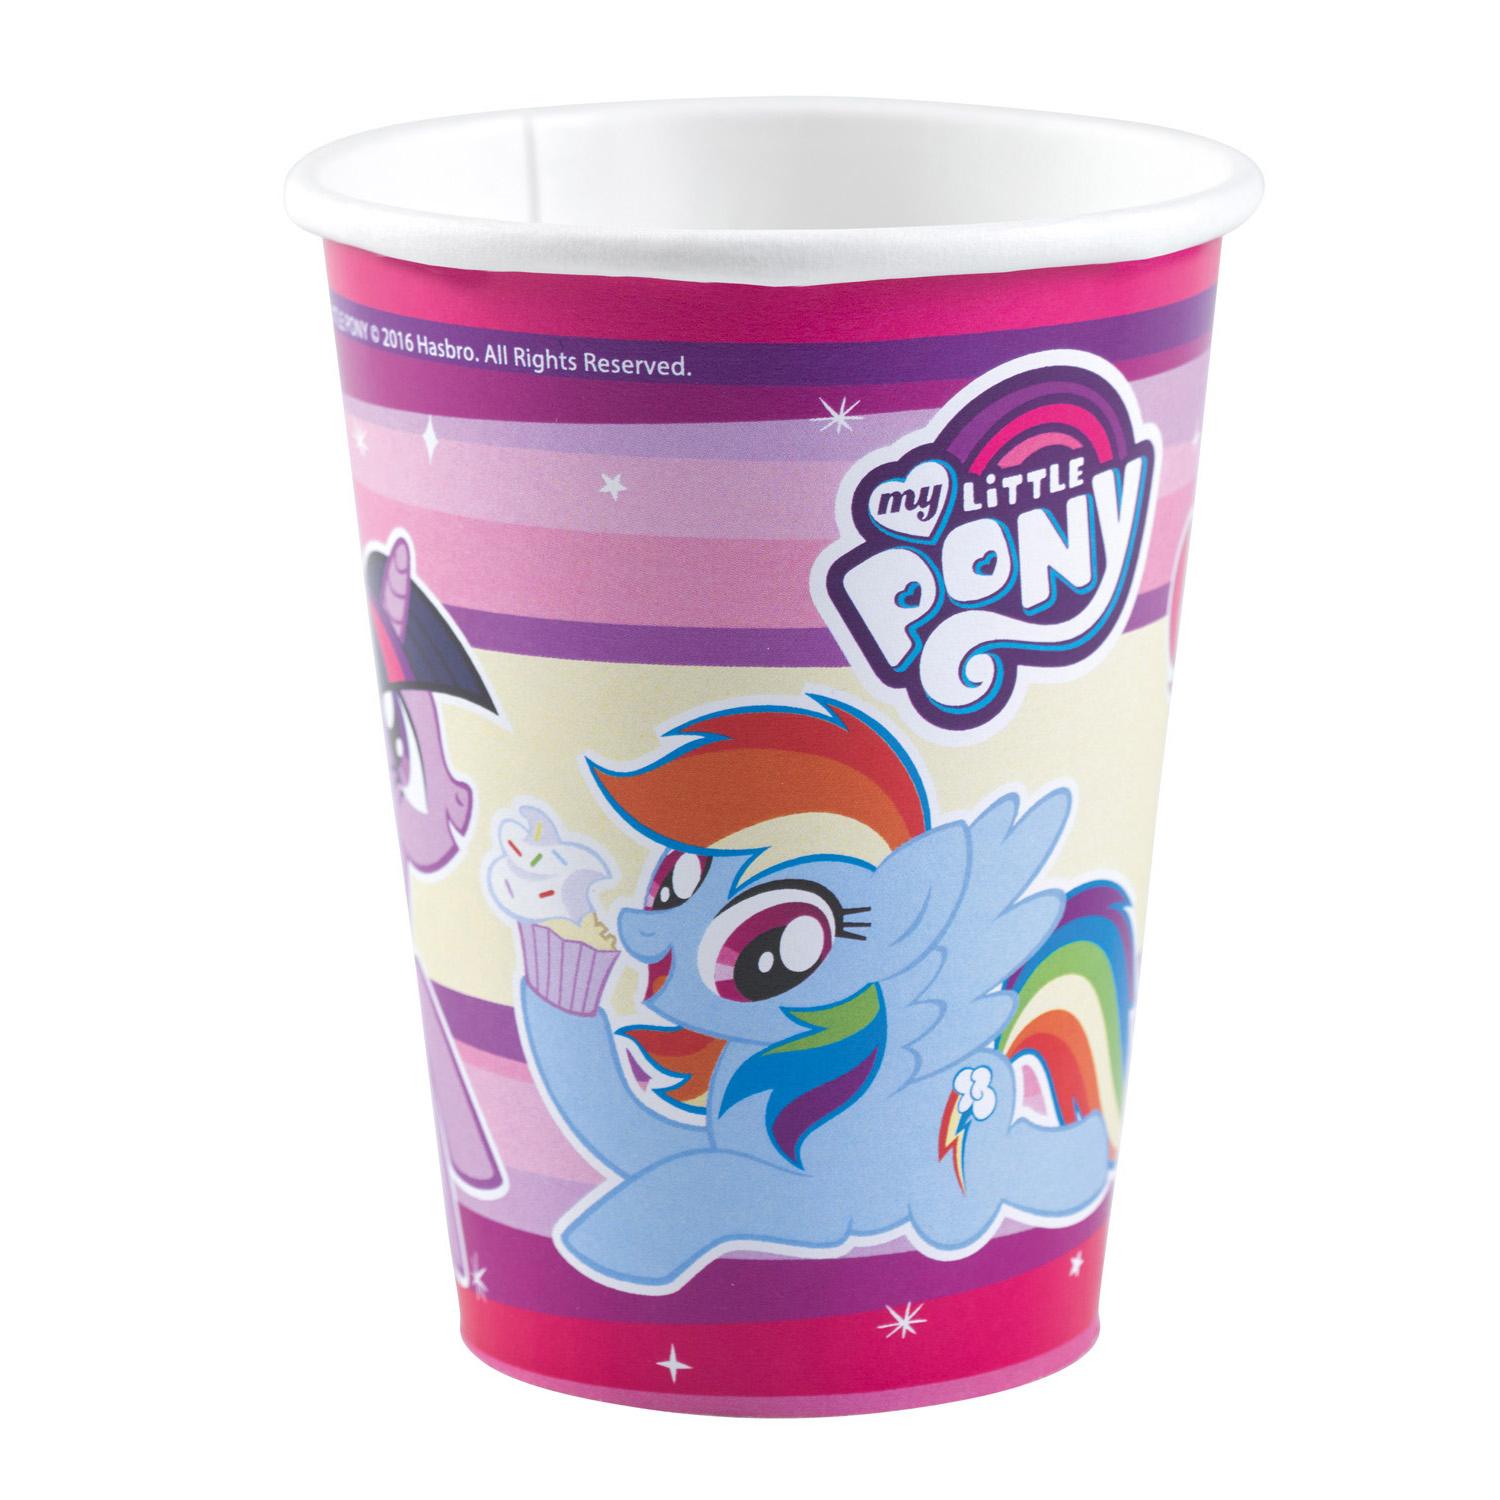 My Little Pony 2017 Paper Cups 9oz, 8pcs Printed Tableware - Party Centre - Party Centre